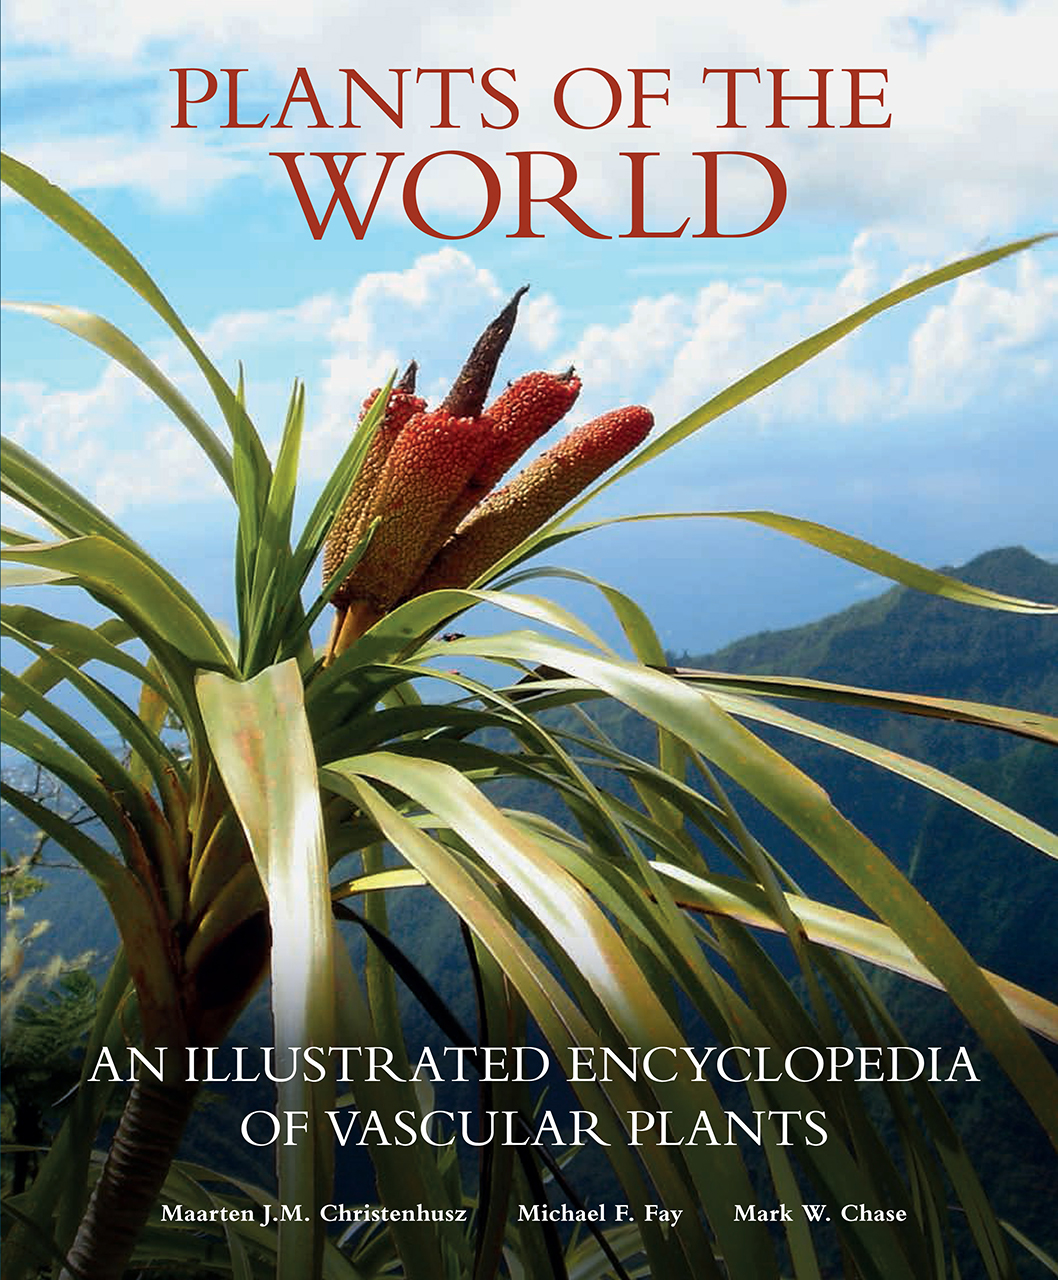 Plants of the World: An Illustrated Encyclopedia of Plants, Christenhusz, Fay, Chase